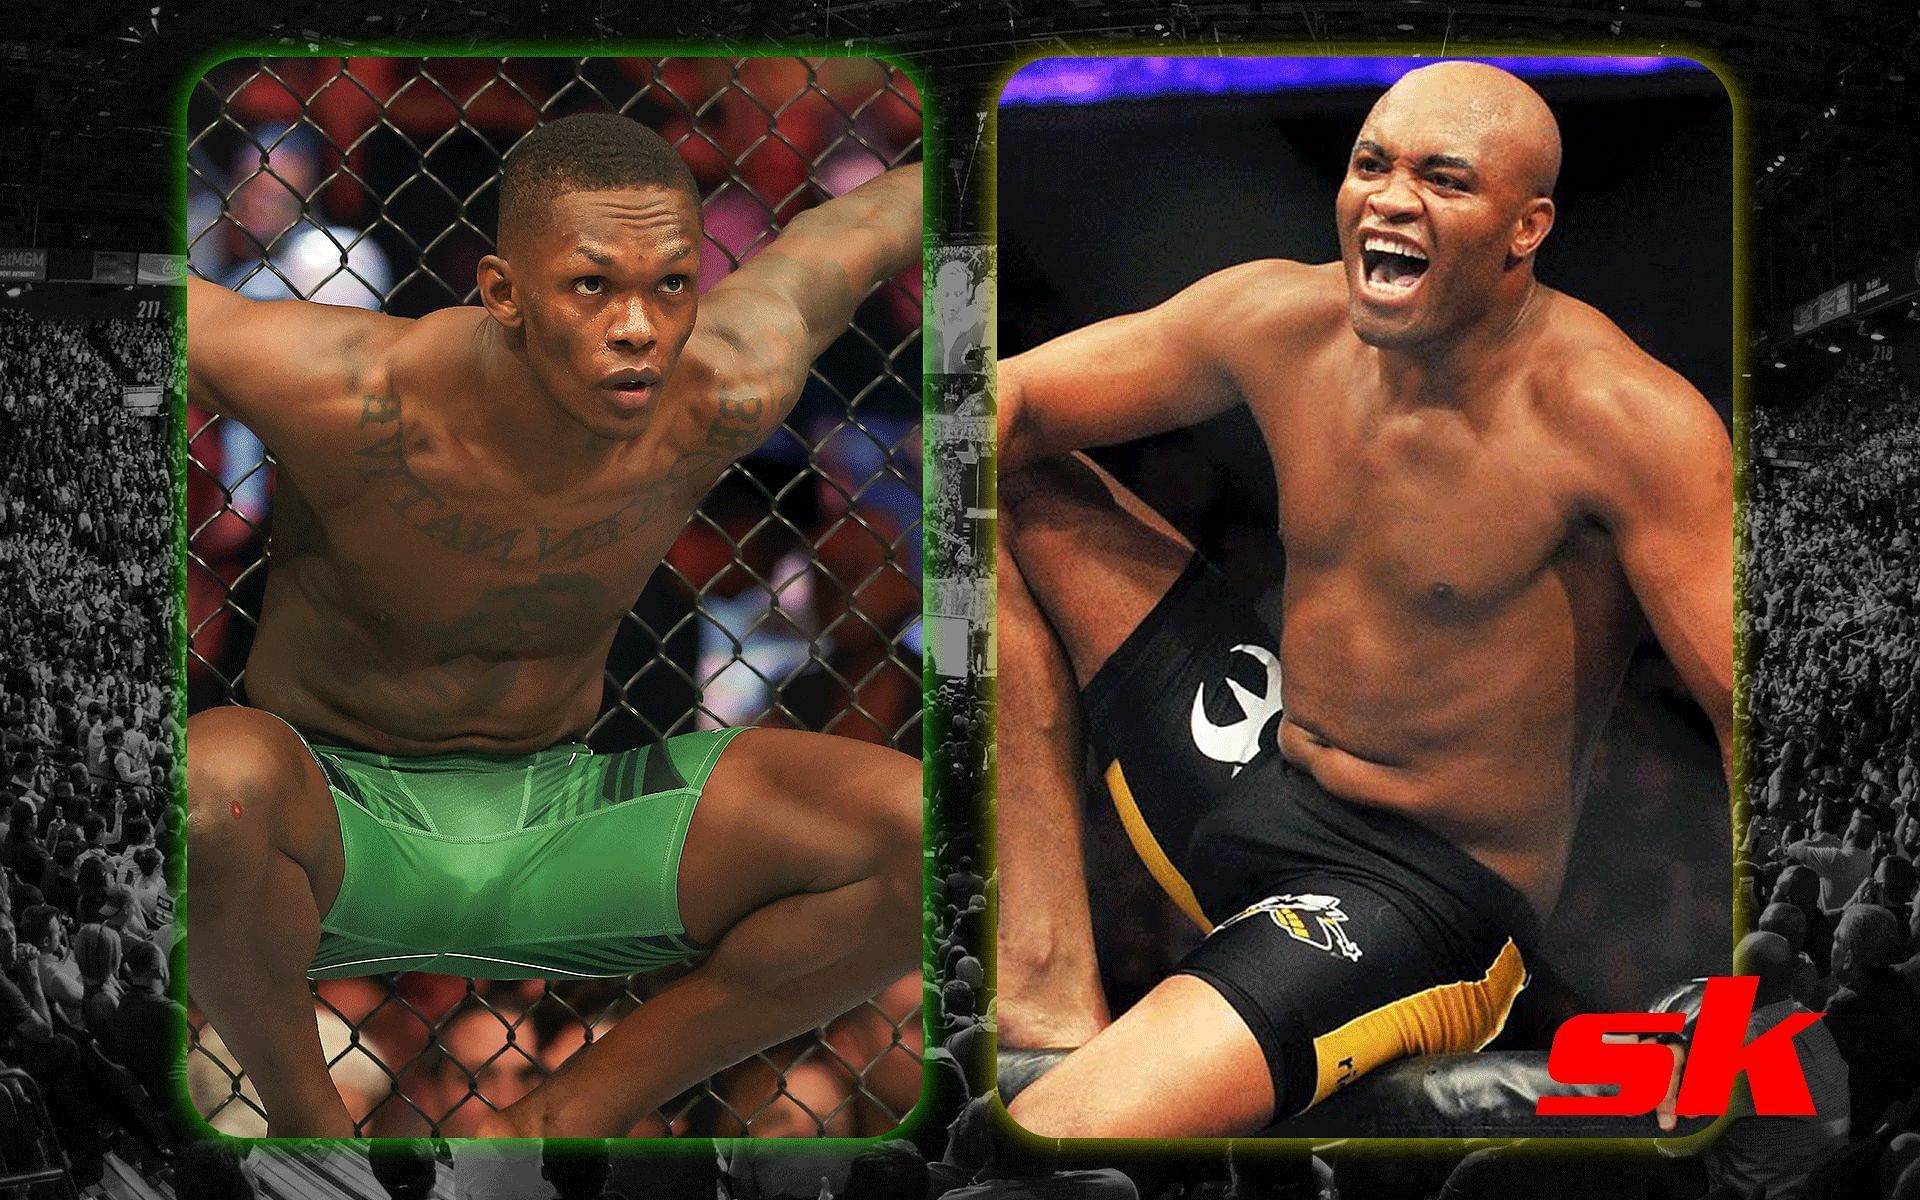 Israel Adesanya and Anderson Silva [Image credits: @AjDuxche on Twitter and Getty Images] 